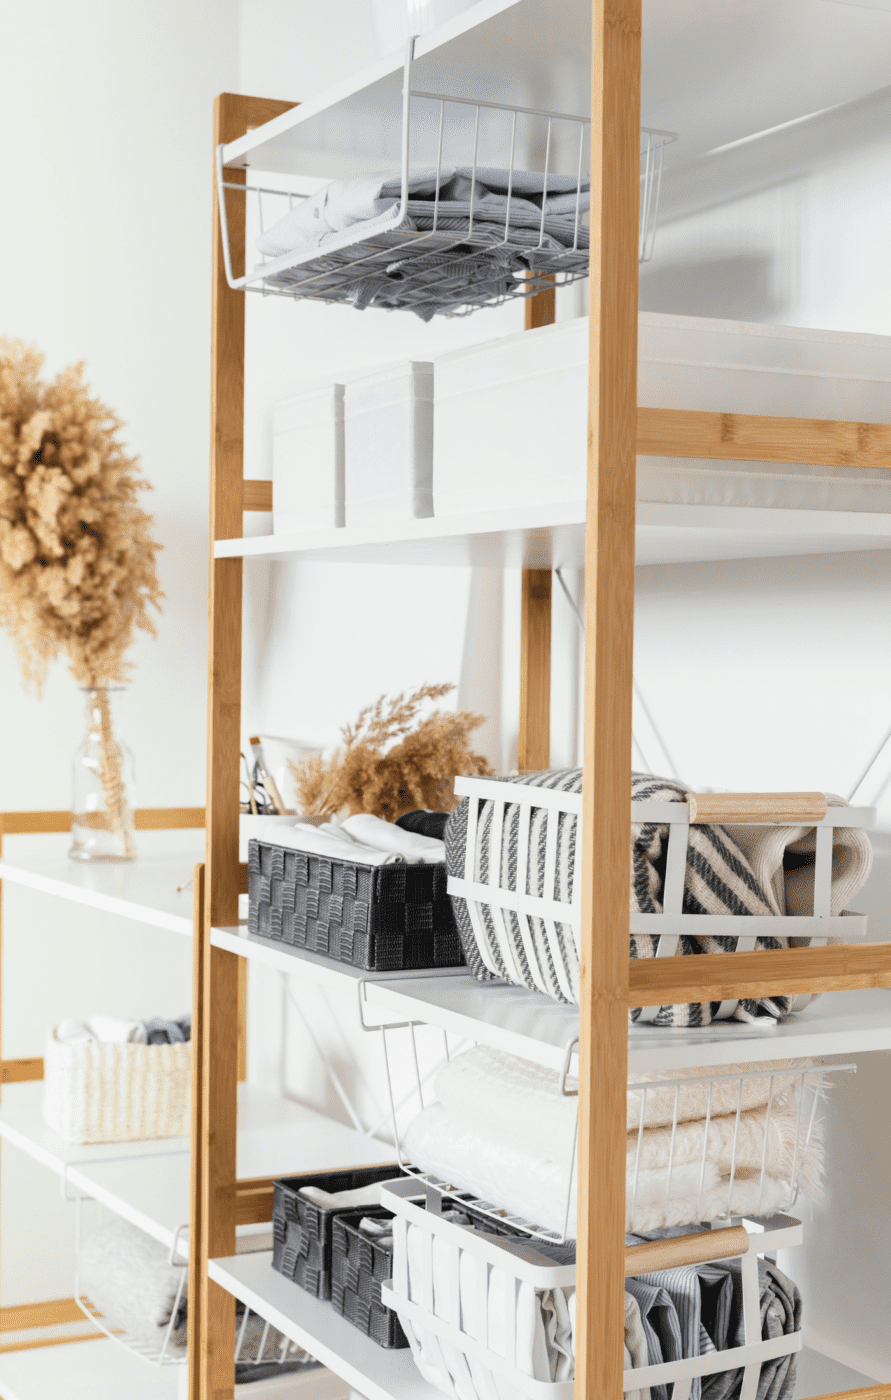 Storage bins and baskets used to organize linens and other personal items.